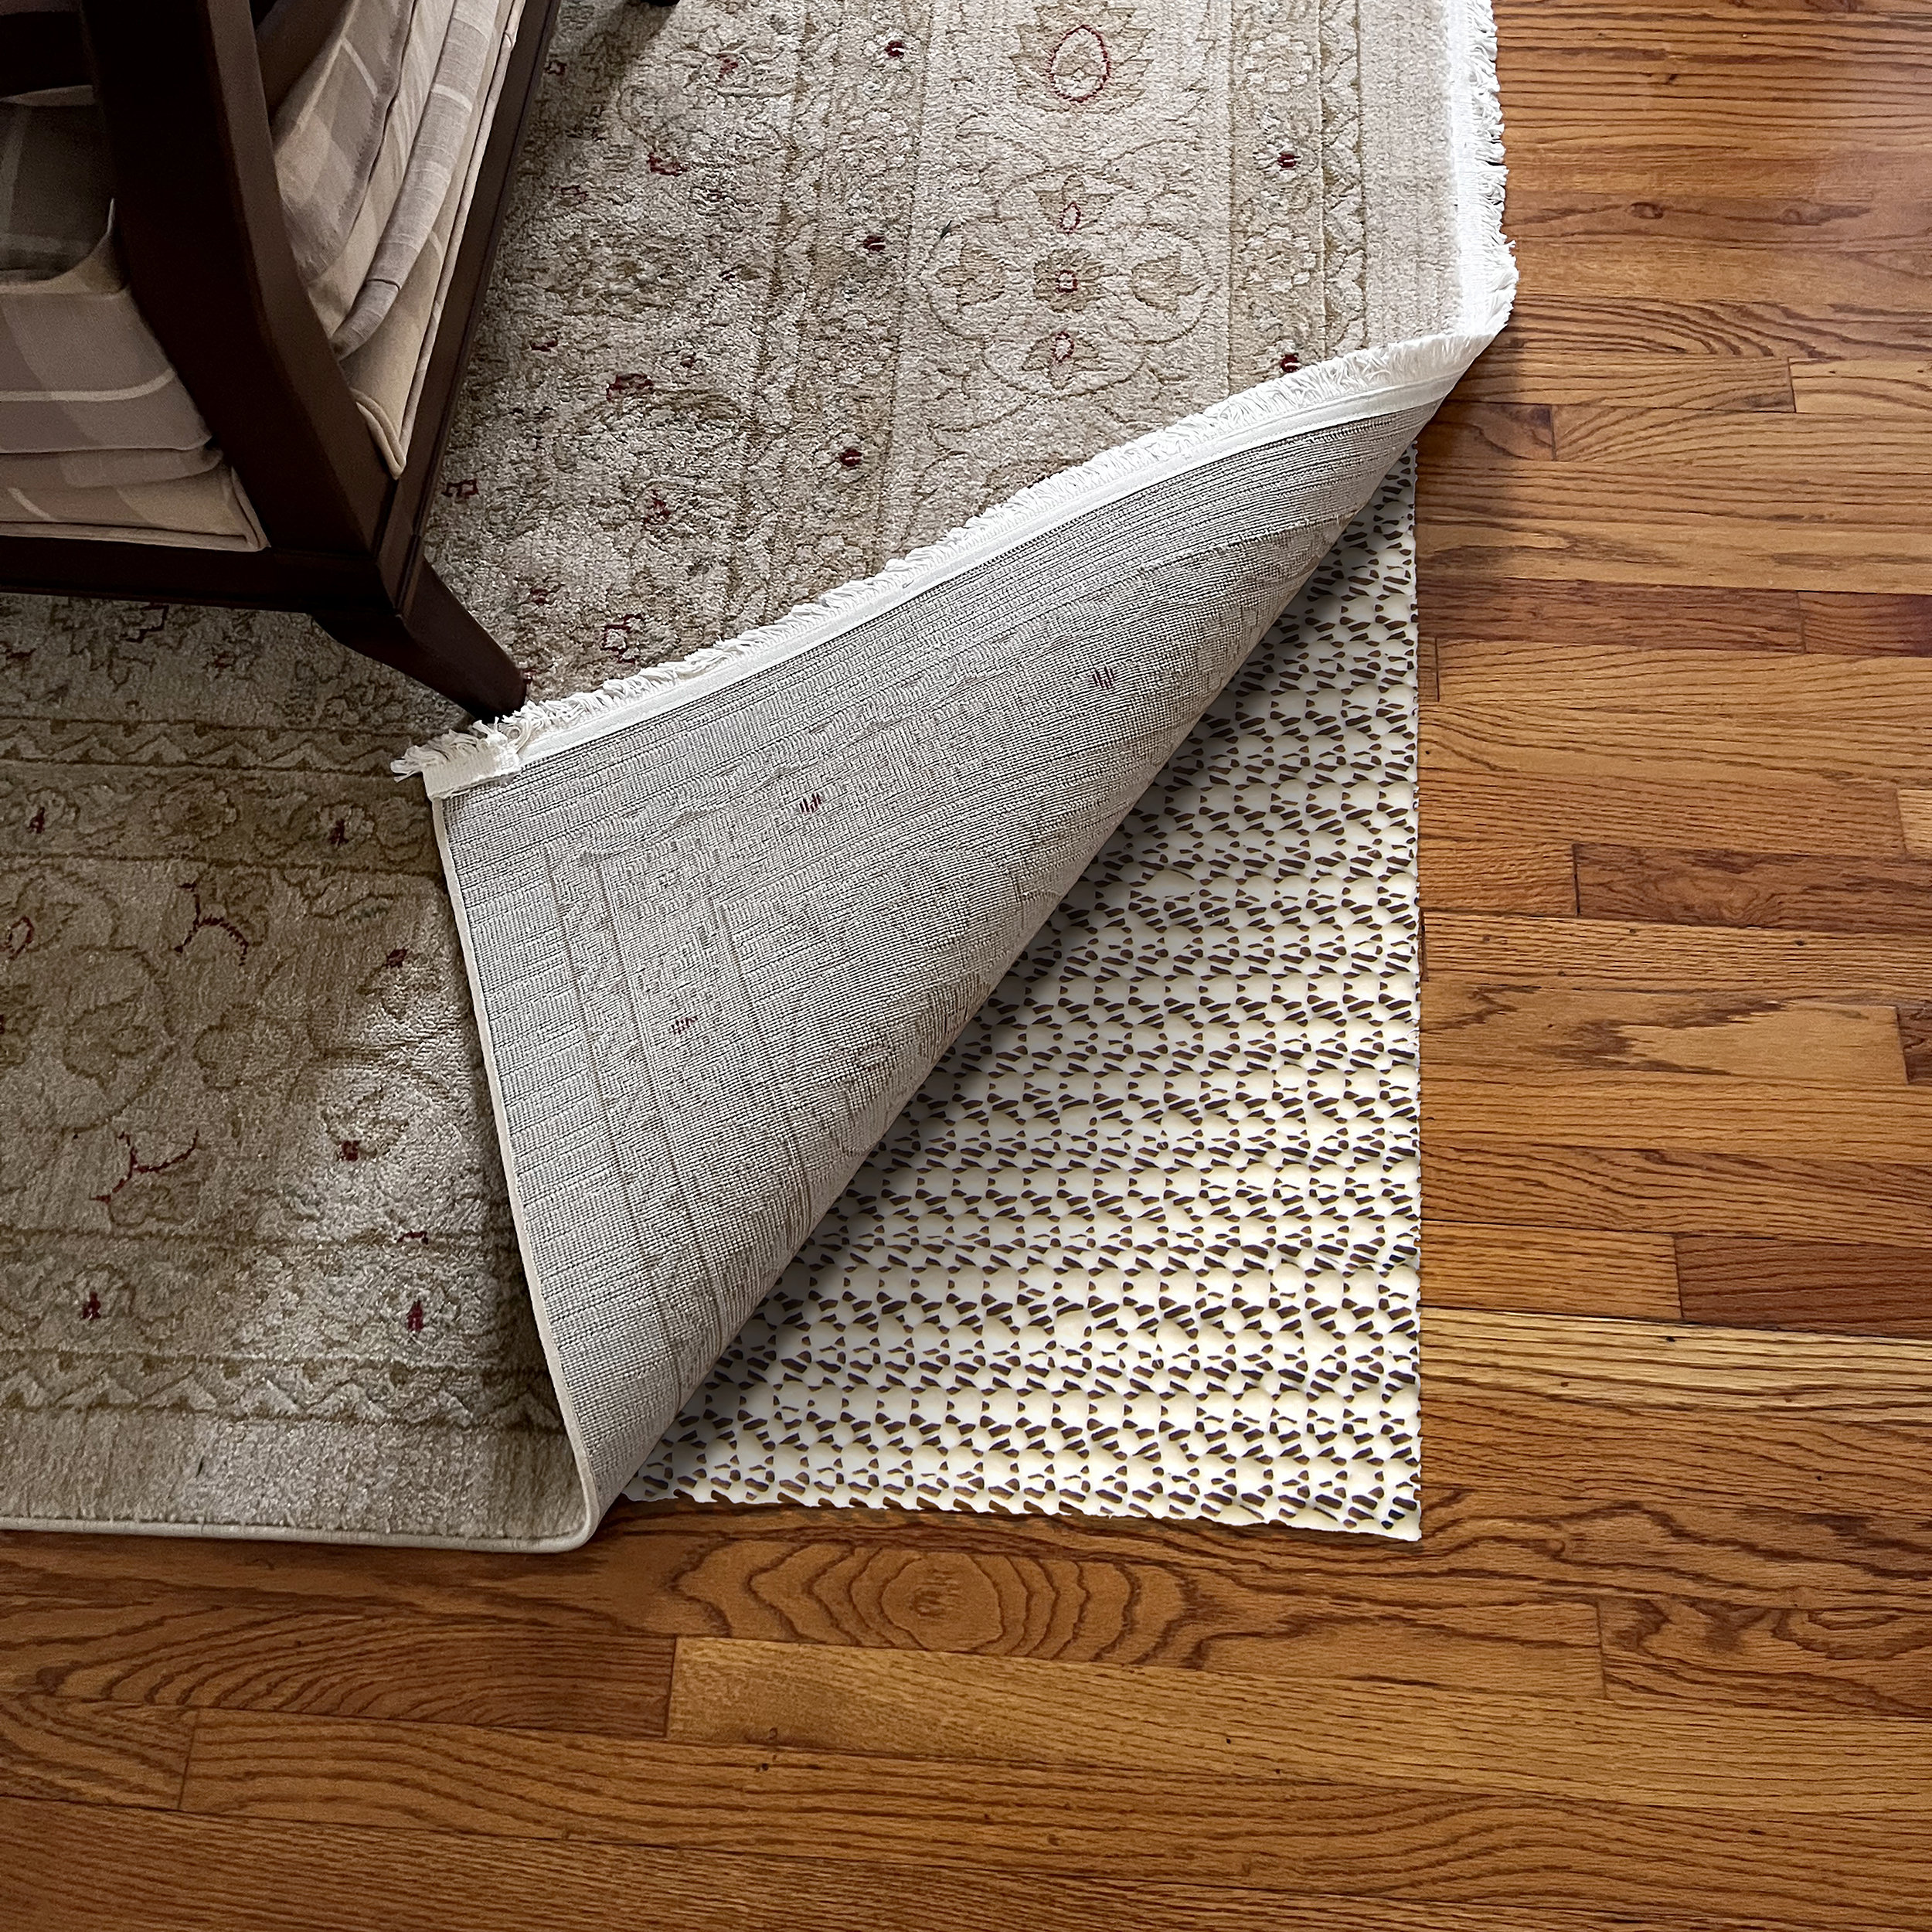 Symple Stuff Non Slip Area Rug Pad Gripping Carpet Pad for Area Rugs and  Hardwood Floors & Reviews